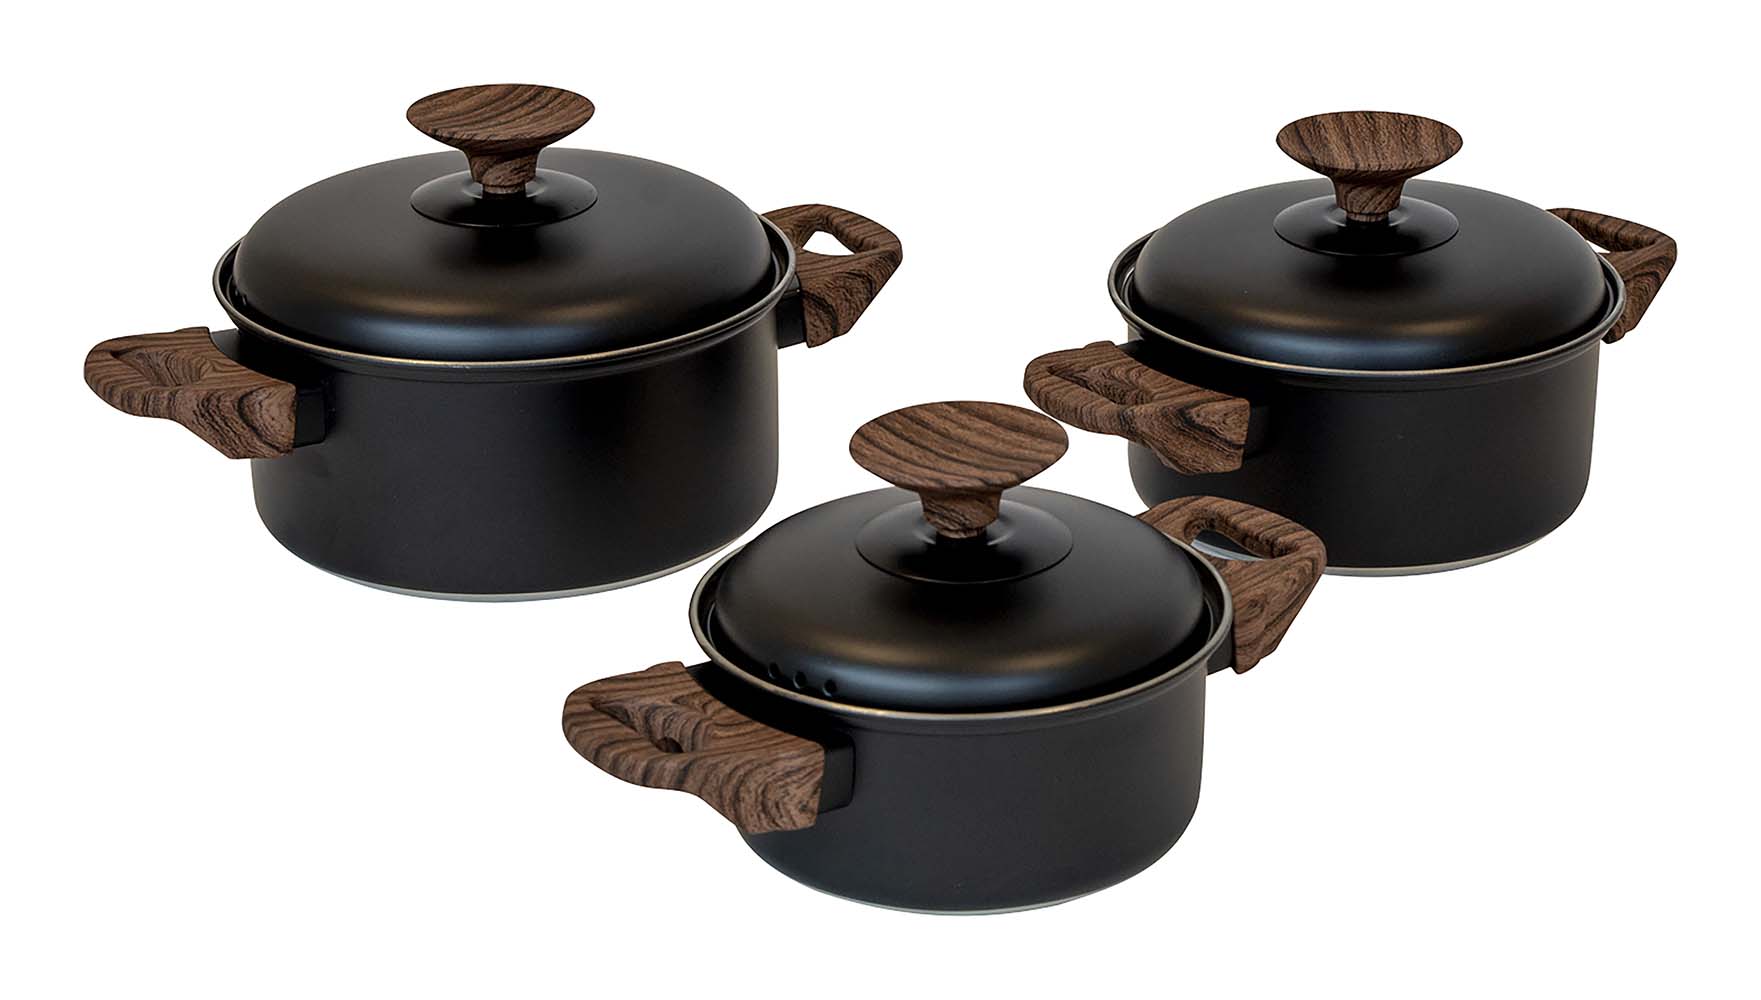 2100972 A 3-part low cookware set. These cooking pans are equipped with sturdy and heat-resistant hand grips and a heat-resistant knob on the lid. The pans have an industrial look because of black stainless steel and the woodlook buttons. Can be used on gas, ceramic and electrical heat sources. Dimensions (Øxh): 14x7, 16x8 and 18x9 cm. Contents: 1,1, 1,6 and 2.3 litres.